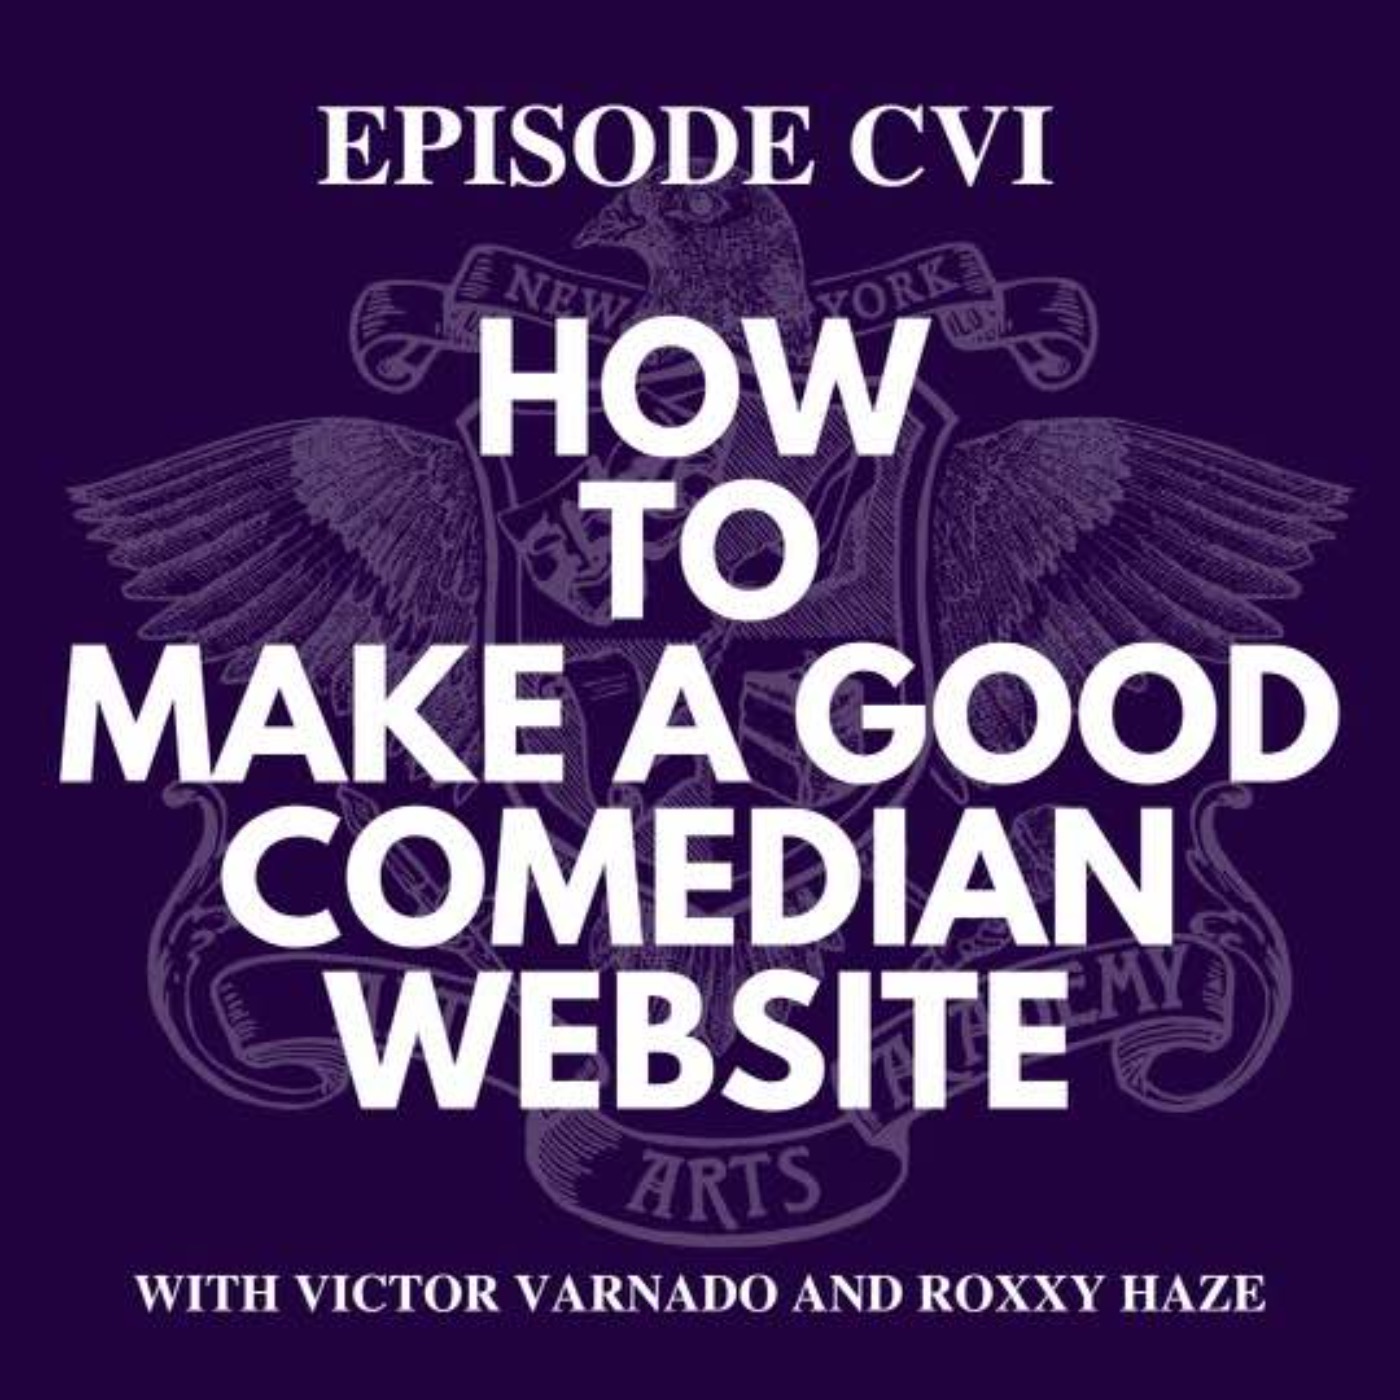 How to Make a Good Comedian Website